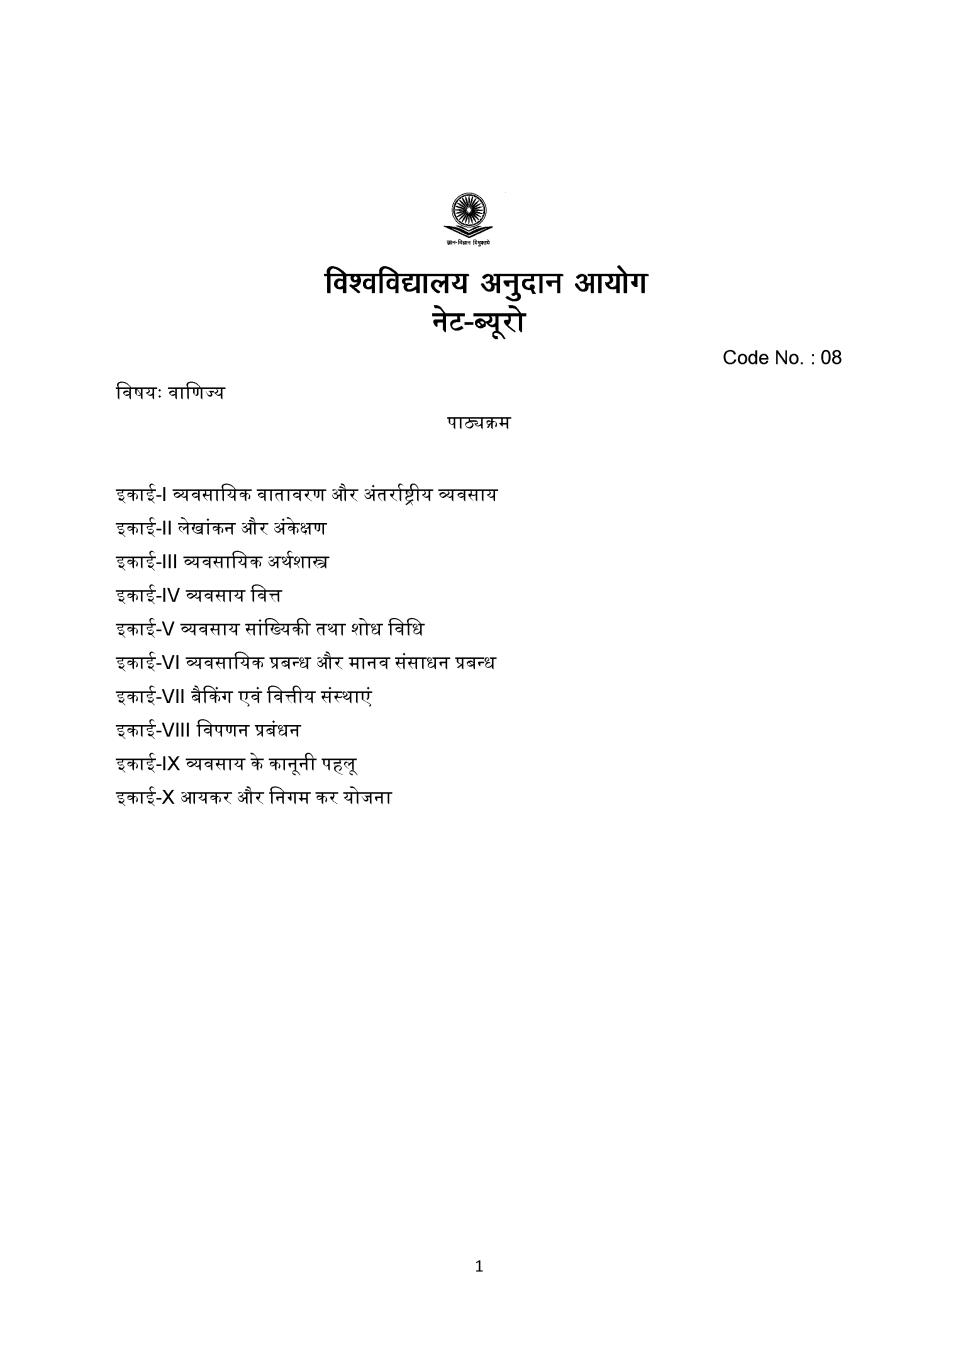 UGC NET Syllabus for Commerce 2020 in Hindi - Page 1